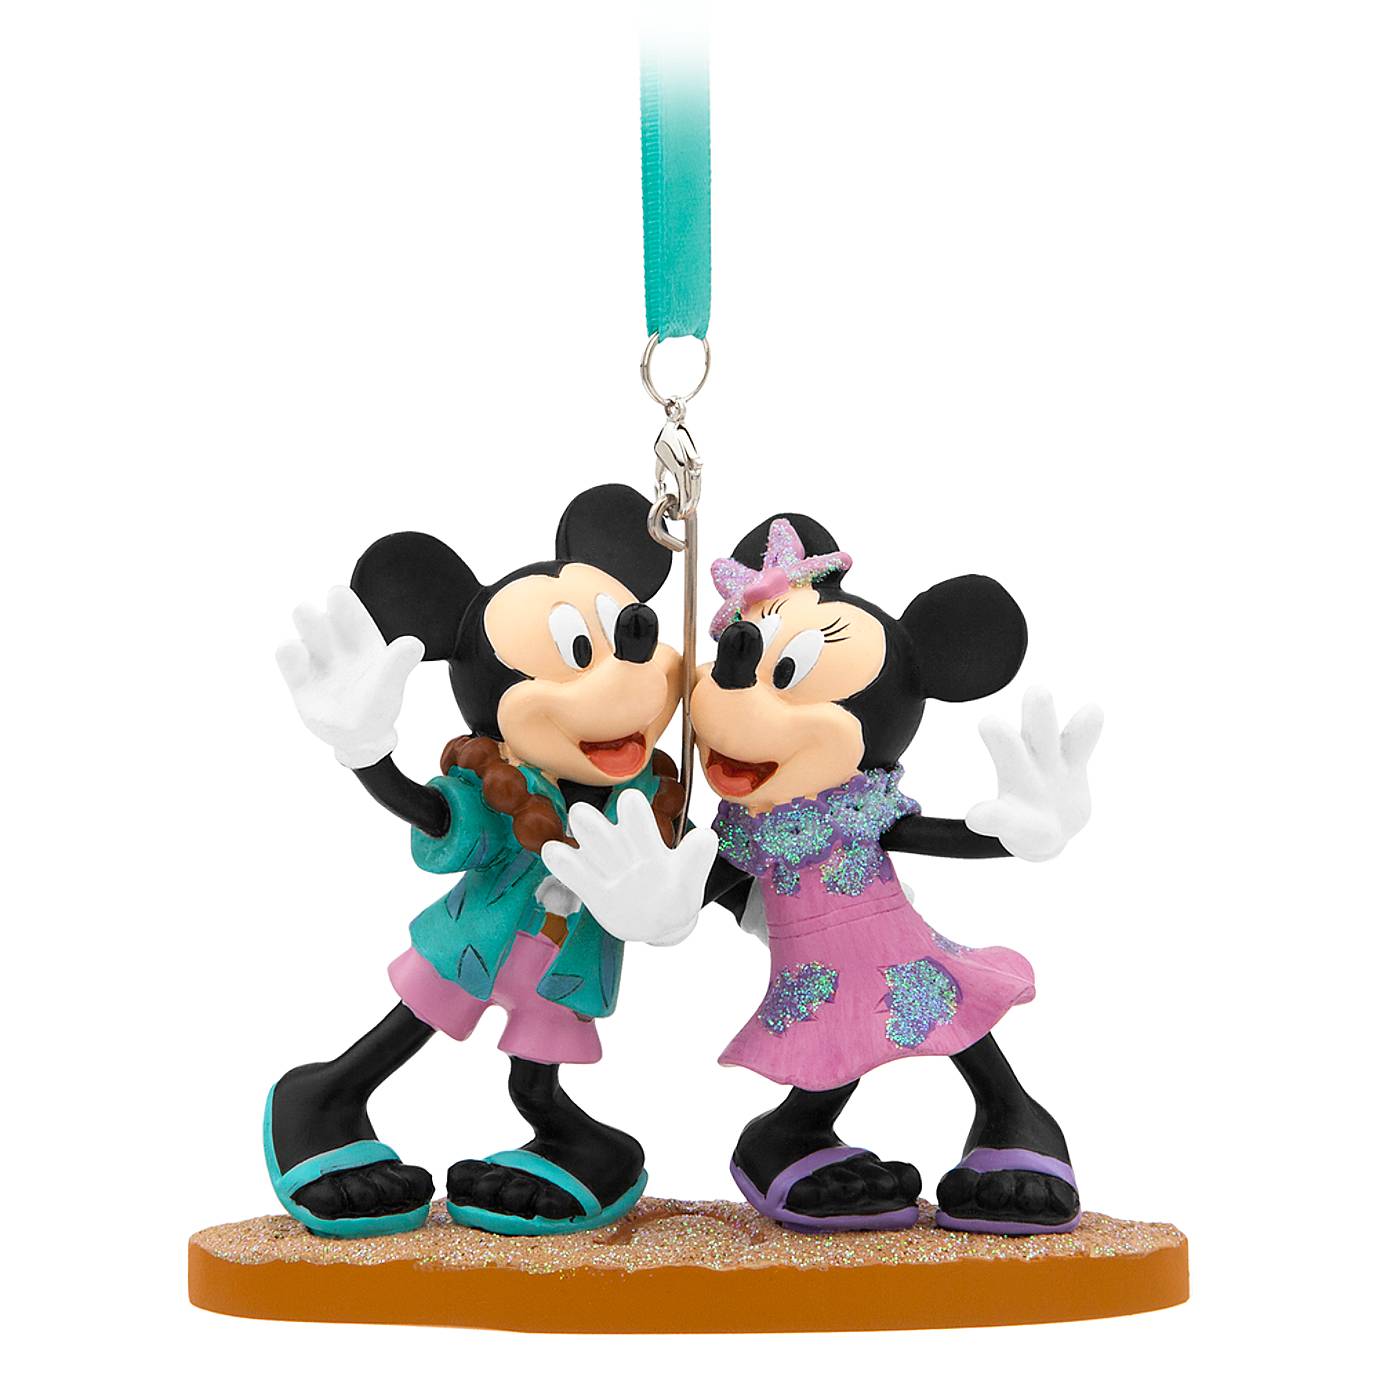 Disney Mickey and Minnie Figural Ornament Aulani Resort & Spa New with Tag